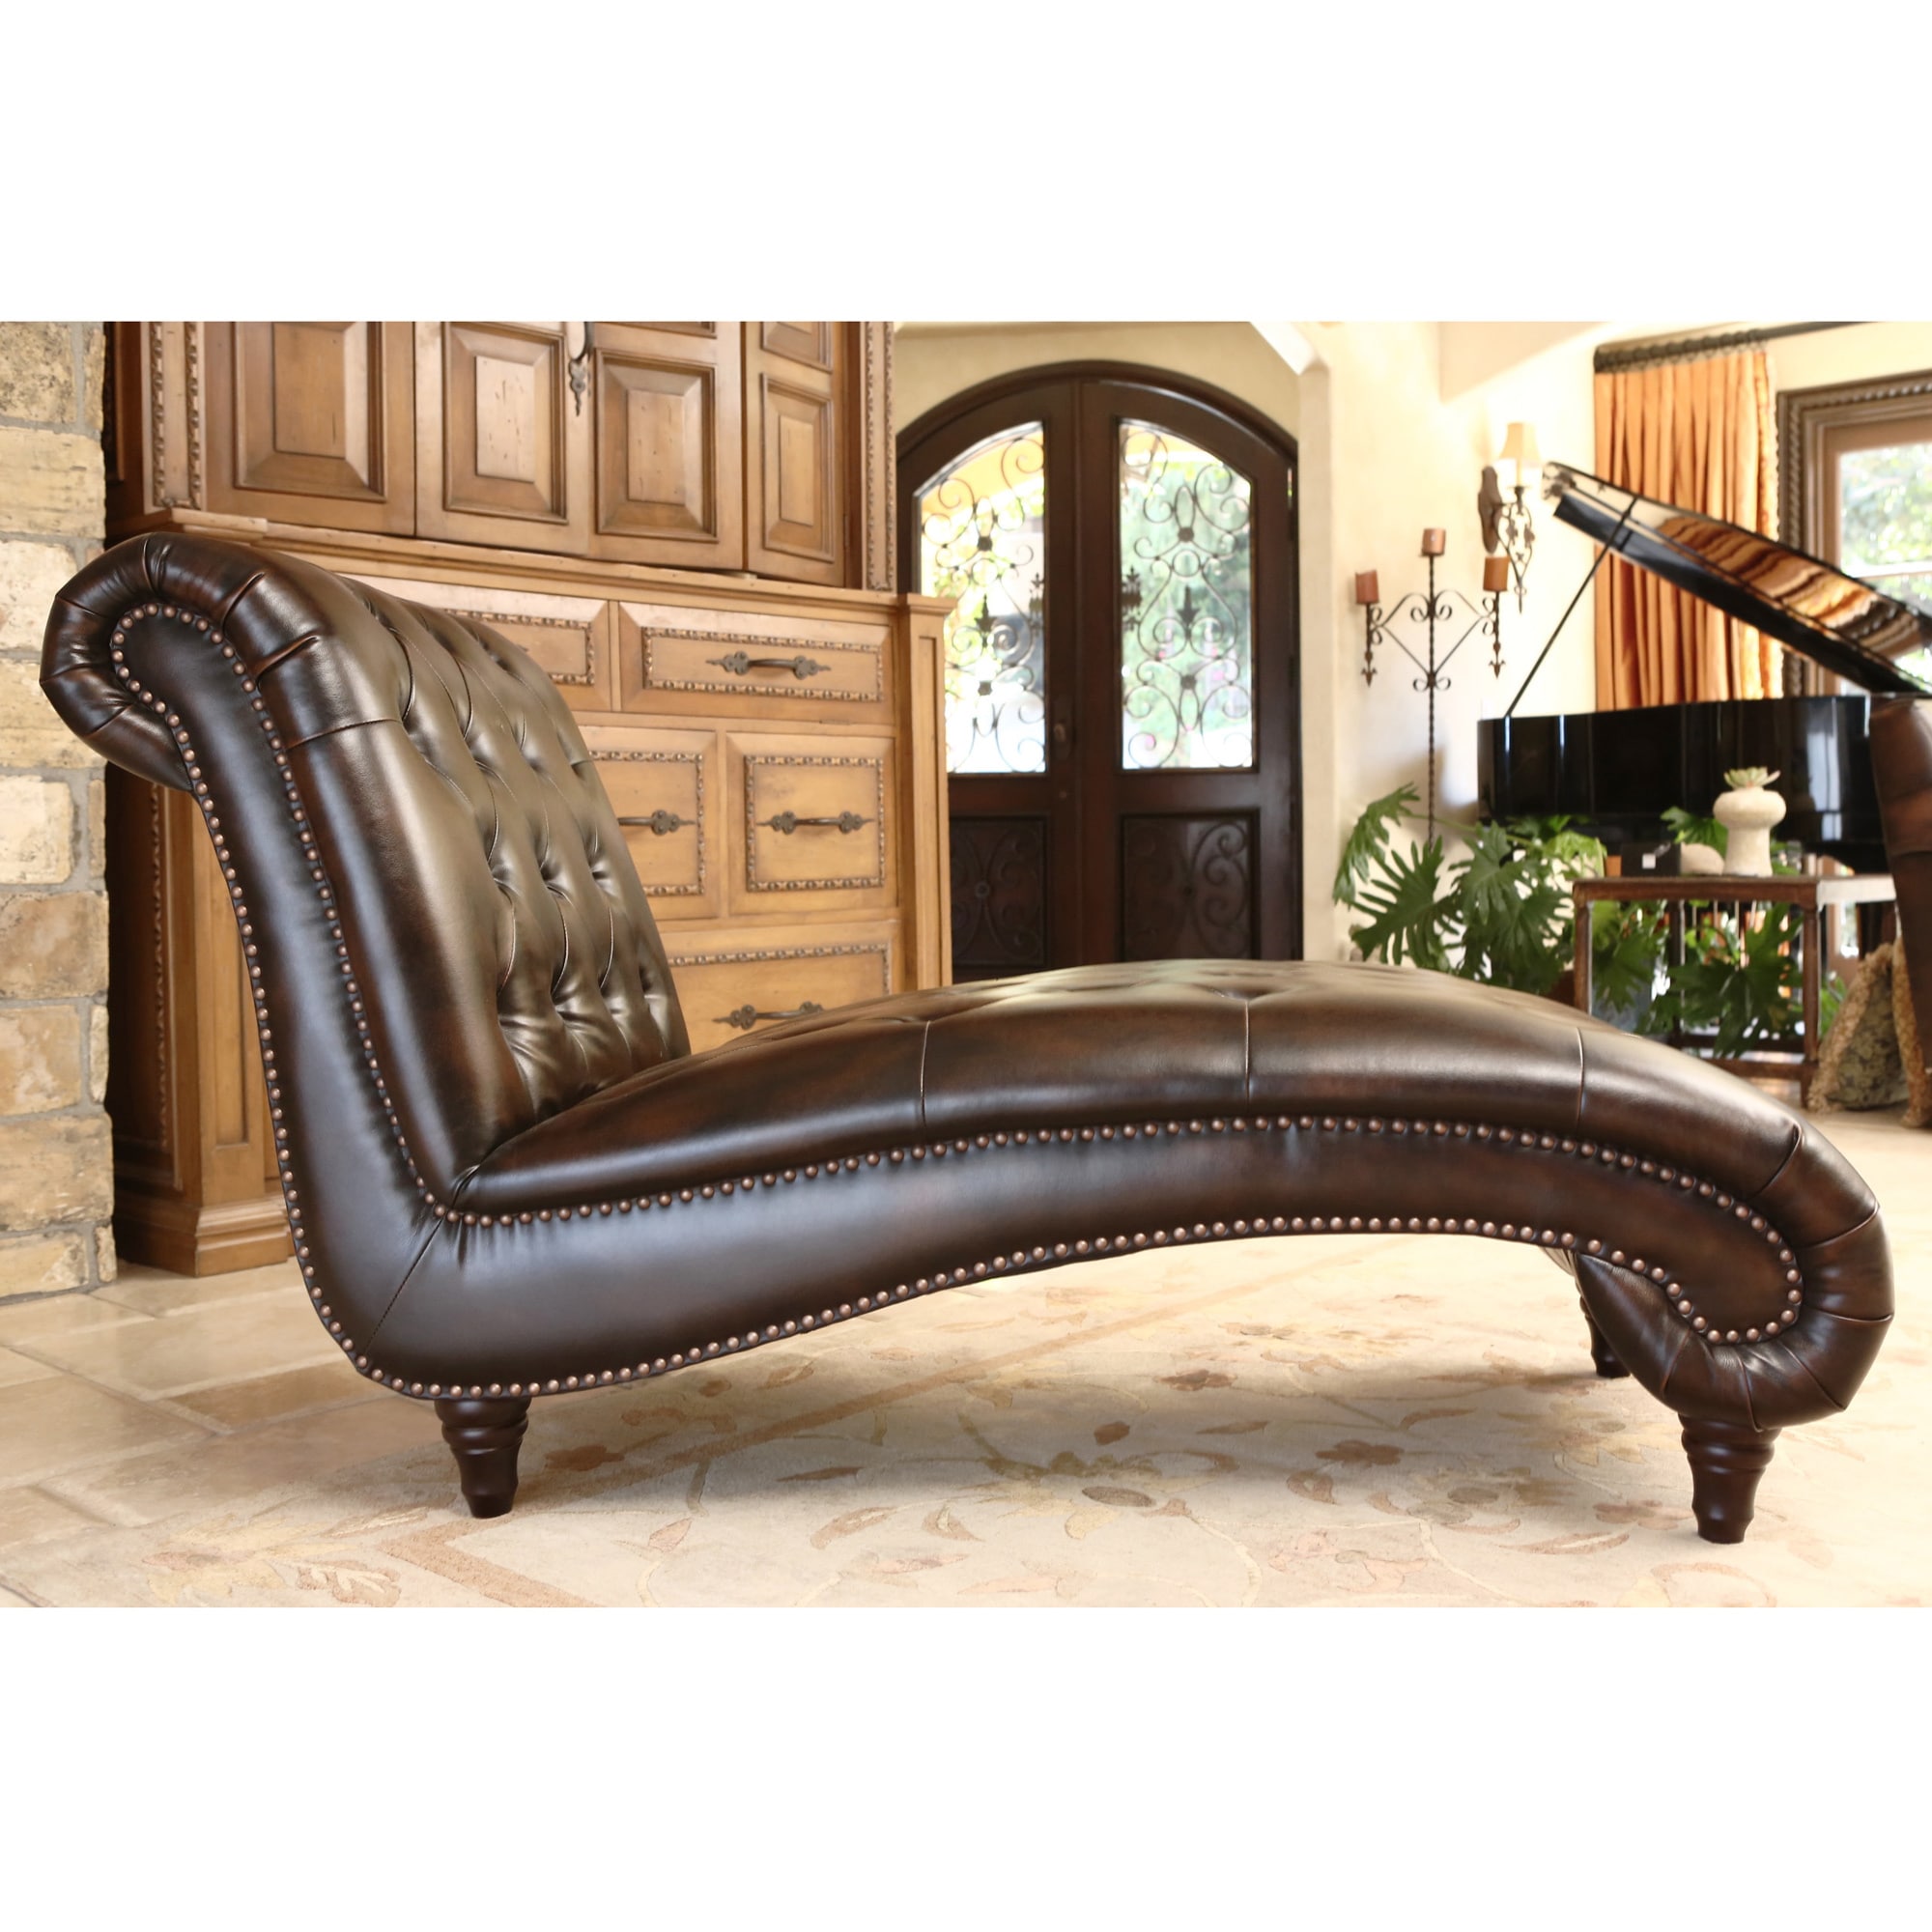 Large Chaise Lounge Chair Daybed Lounger Bonded Brown Leather Armless